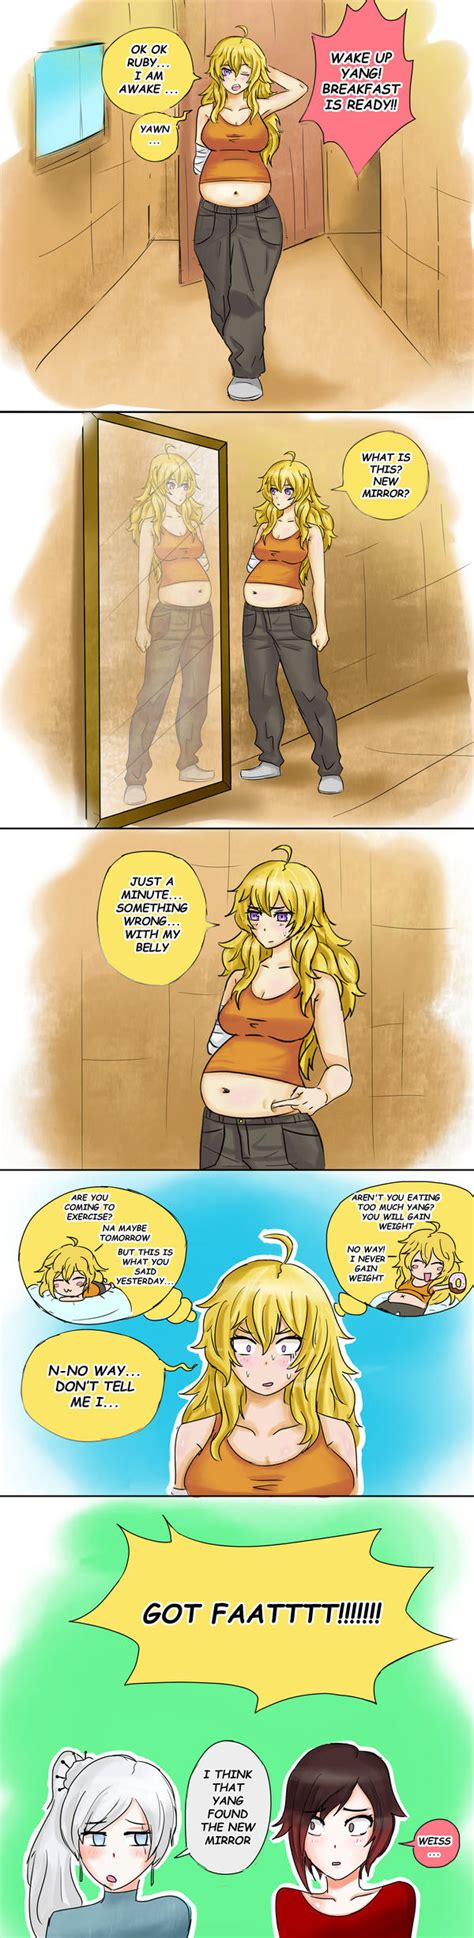 Rwby Yang Weight Gain Comics By Bellywg On Deviantart